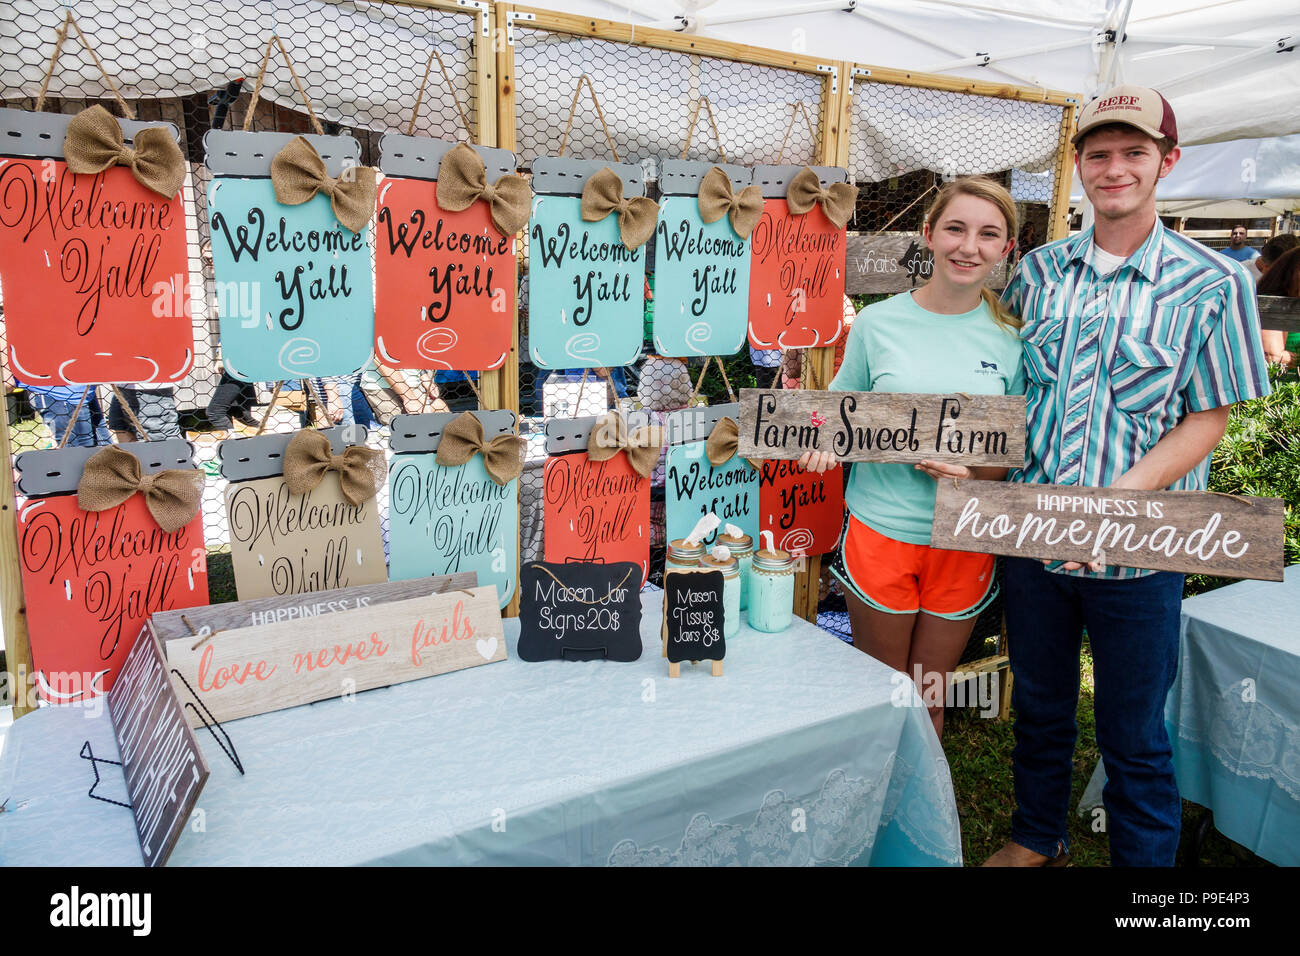 Florida,Micanopy,Fall Harvest Festival,annual small town community booths stalls vendors buying selling,handicraft,hand painted signs,boy boys,male ki Stock Photo